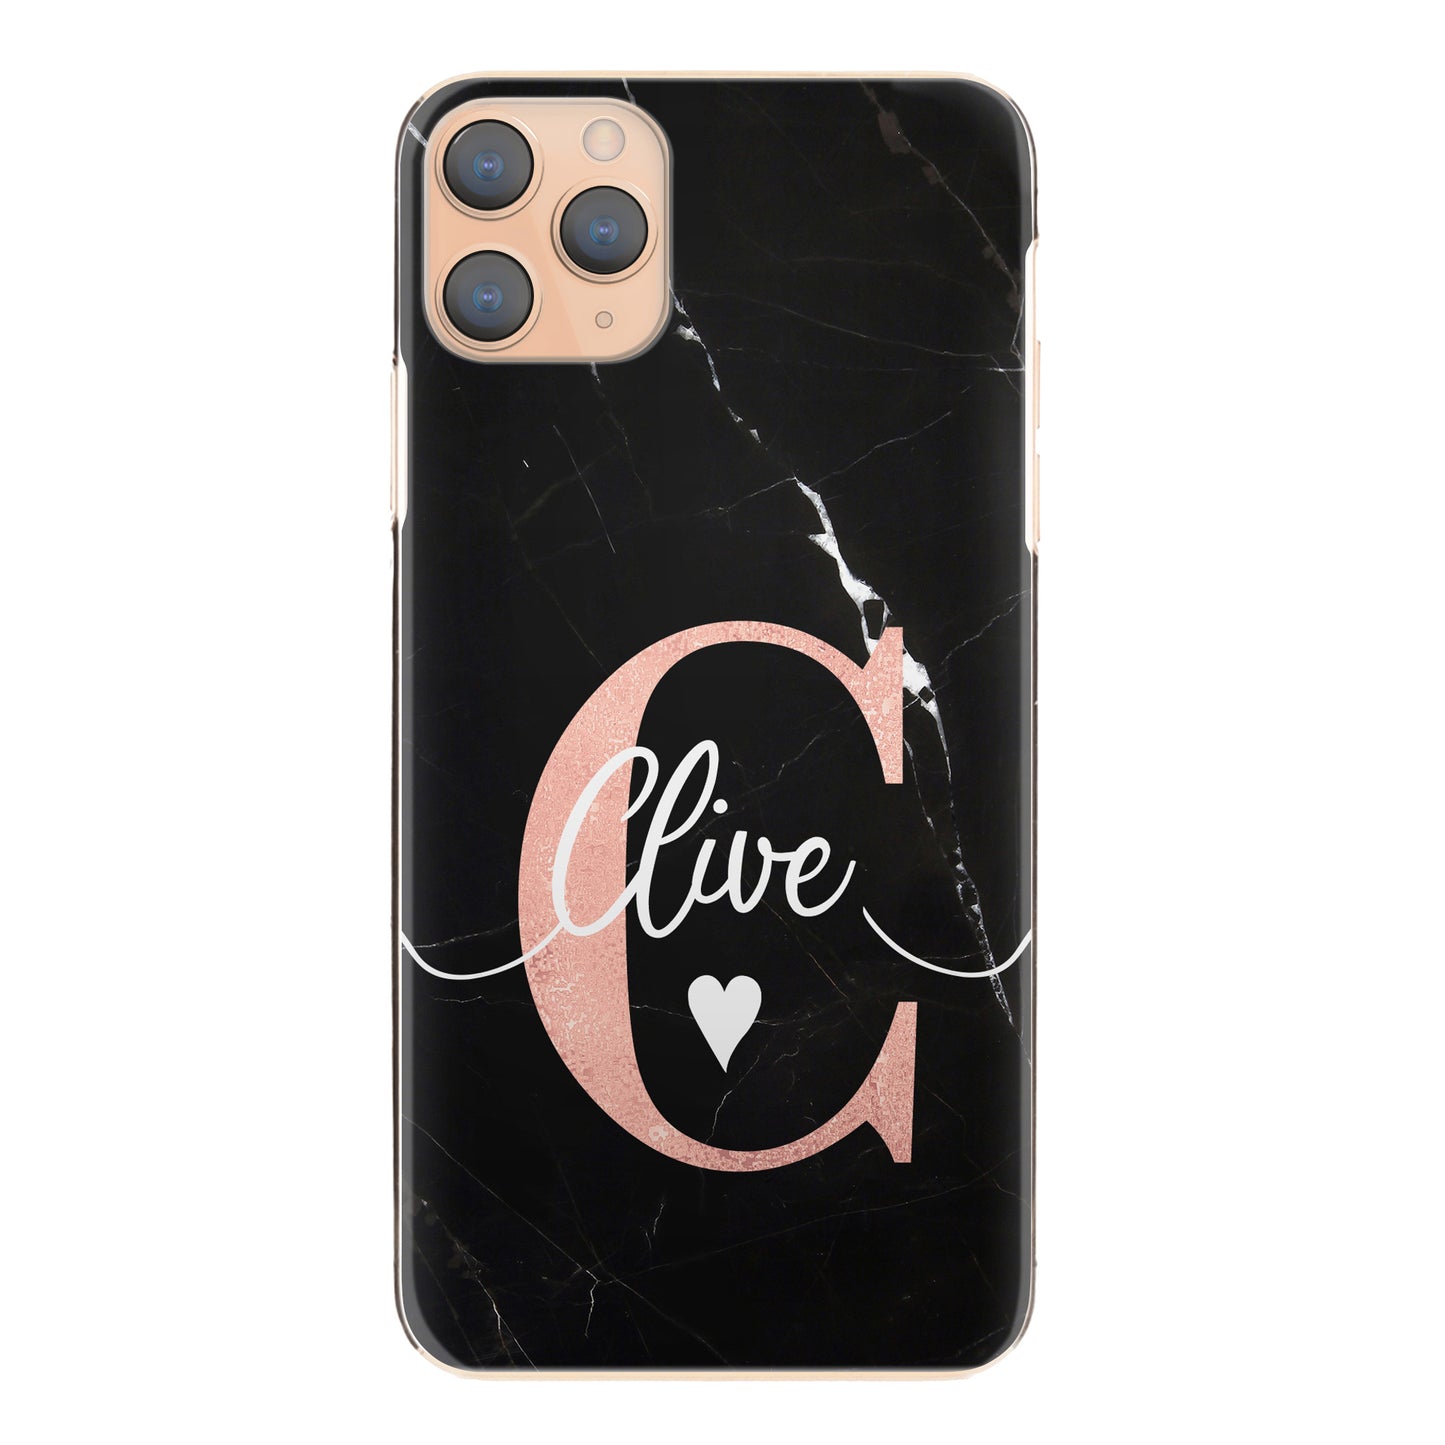 Personalised Huawei Phone Hard Case with Stylish Heart Text and Pink Initial on White Infused Black Marble